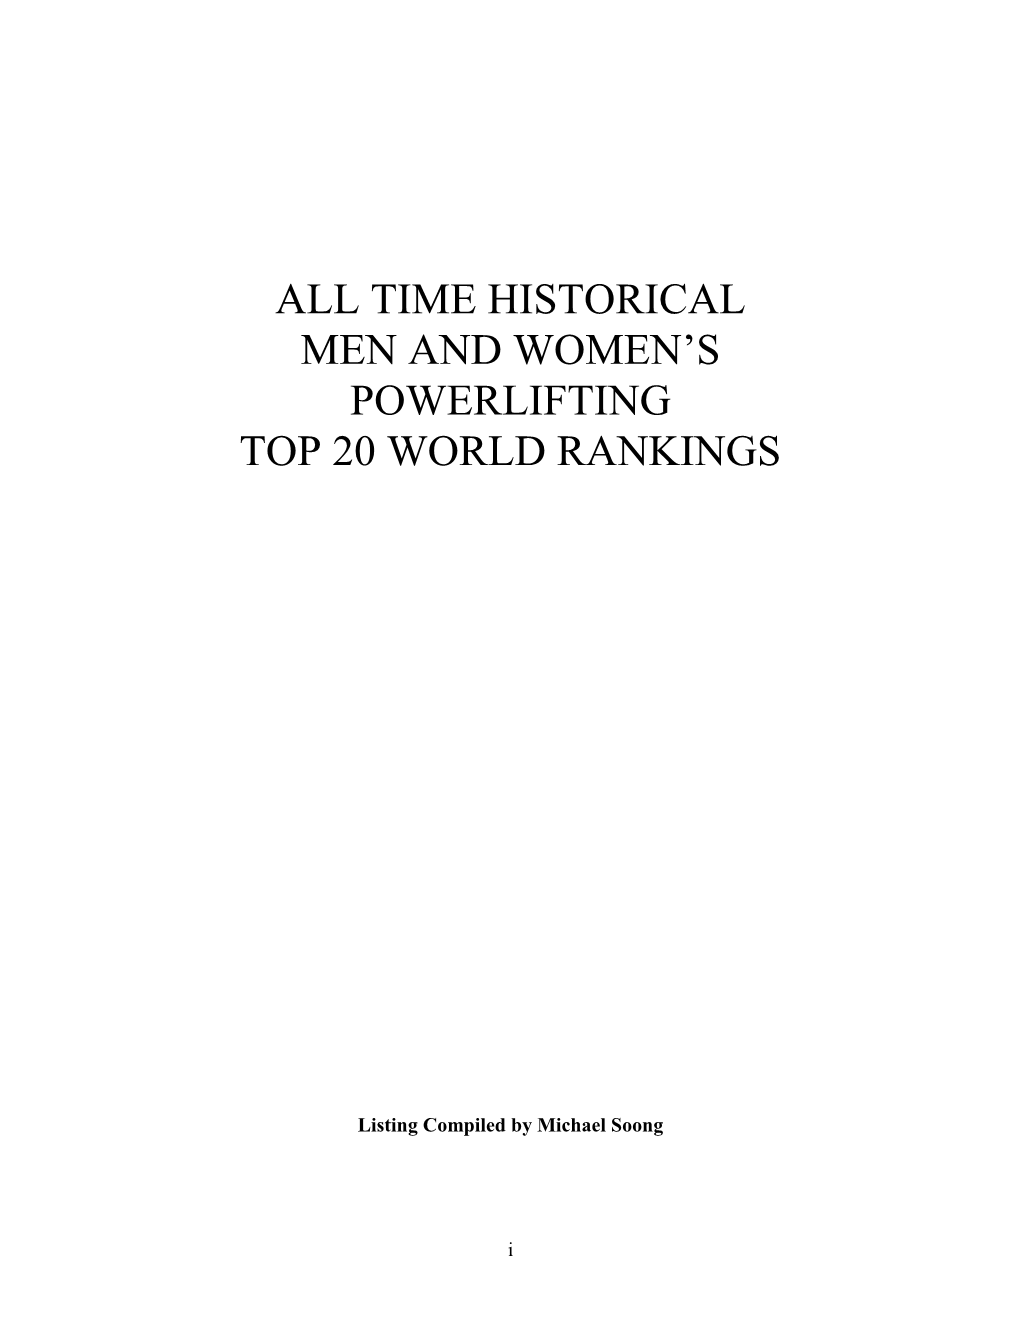 All Time Historical Men and Women's Powerlifting Top 20 World Rankings